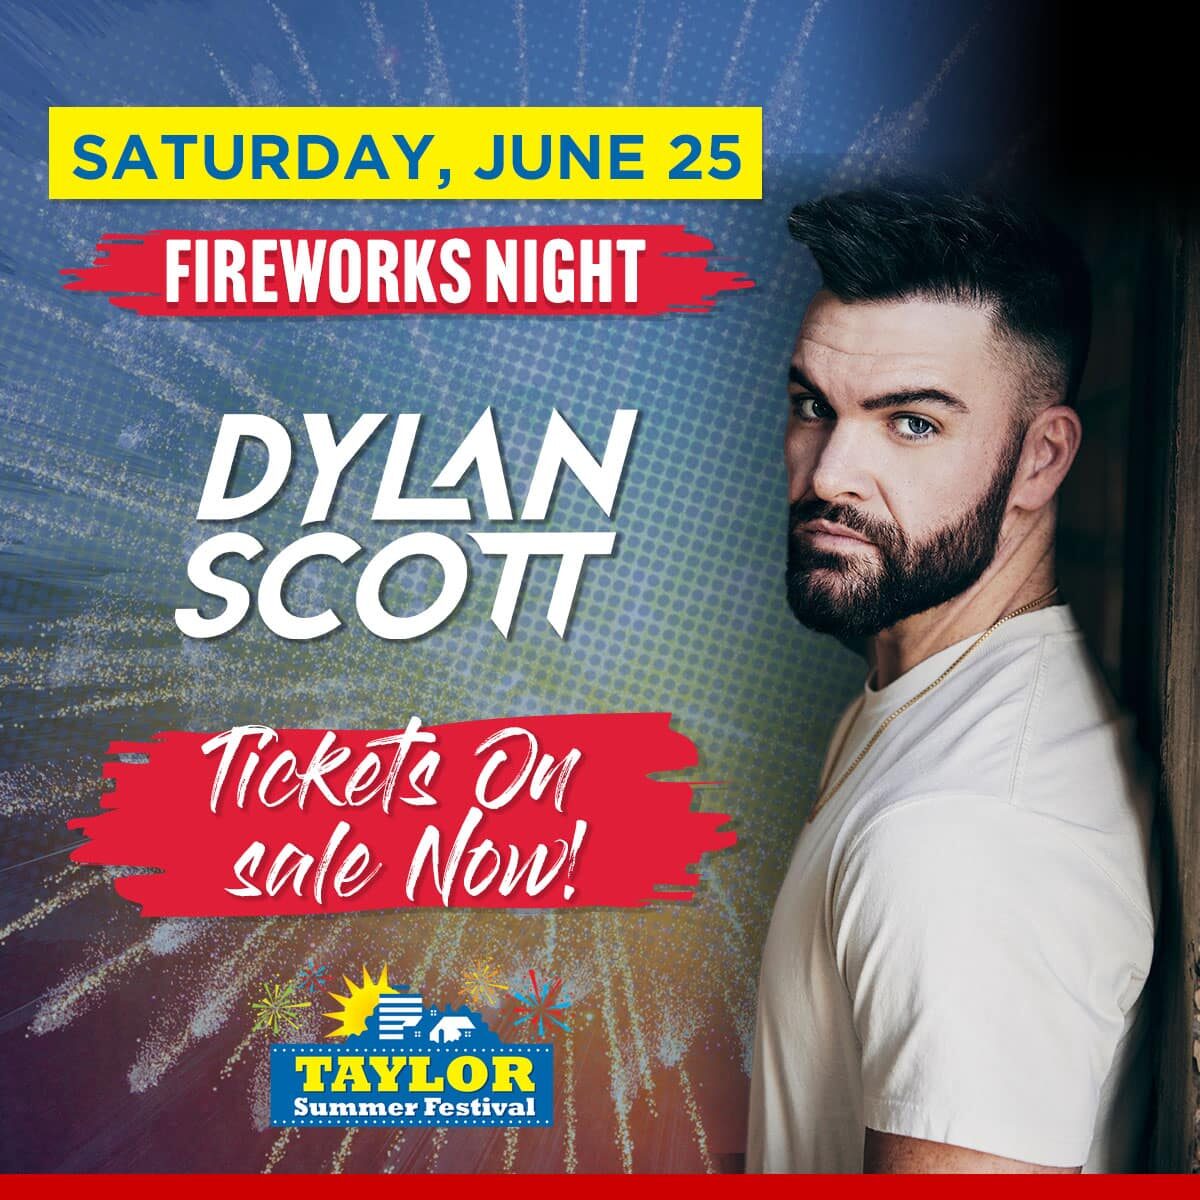 Flyer for Saturday, June 25 fireworks night featuring Dylan Scott, tickets on sale now!